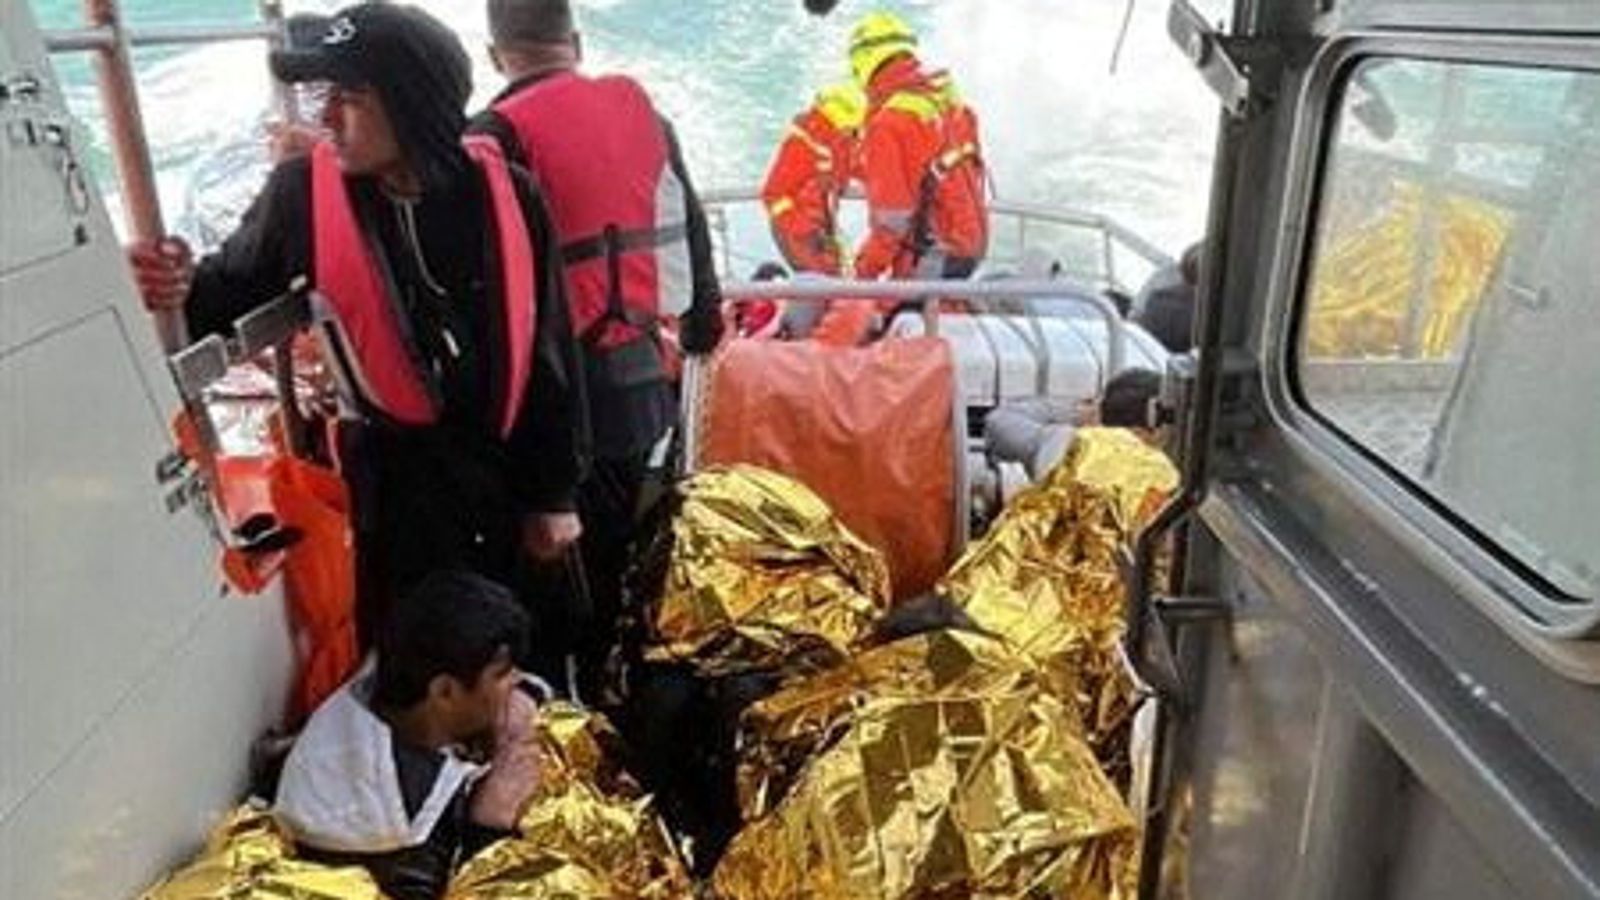 At least six people dead and dozens rescued as migrant boat crossing Channel capsizes